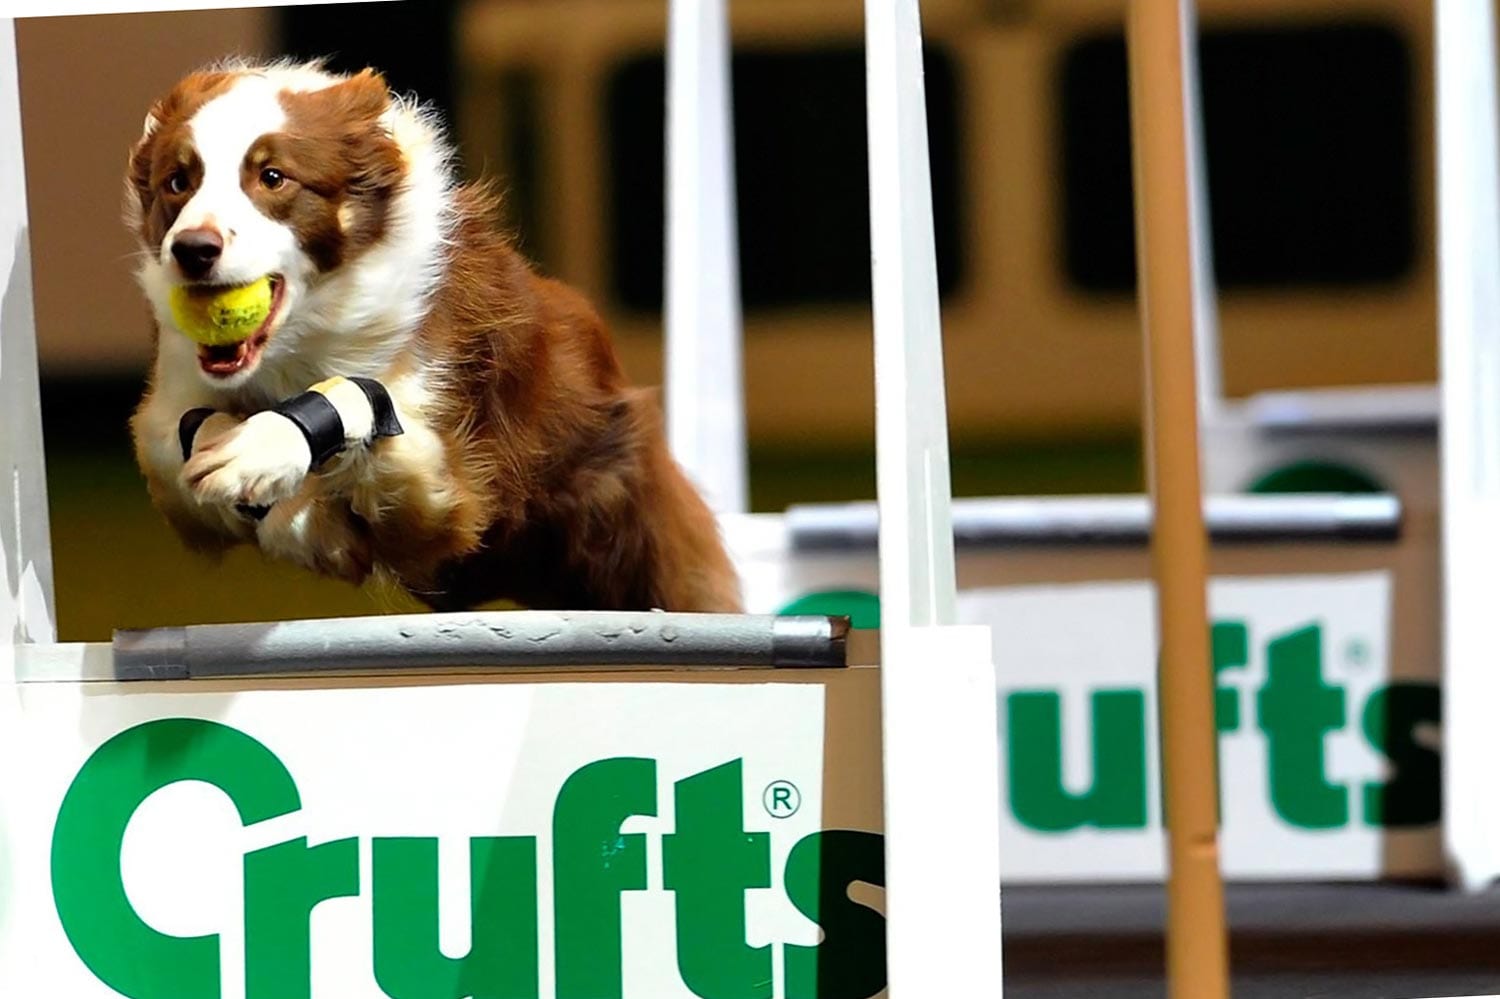 Dog Competing at Crufts Dog Show in Britain